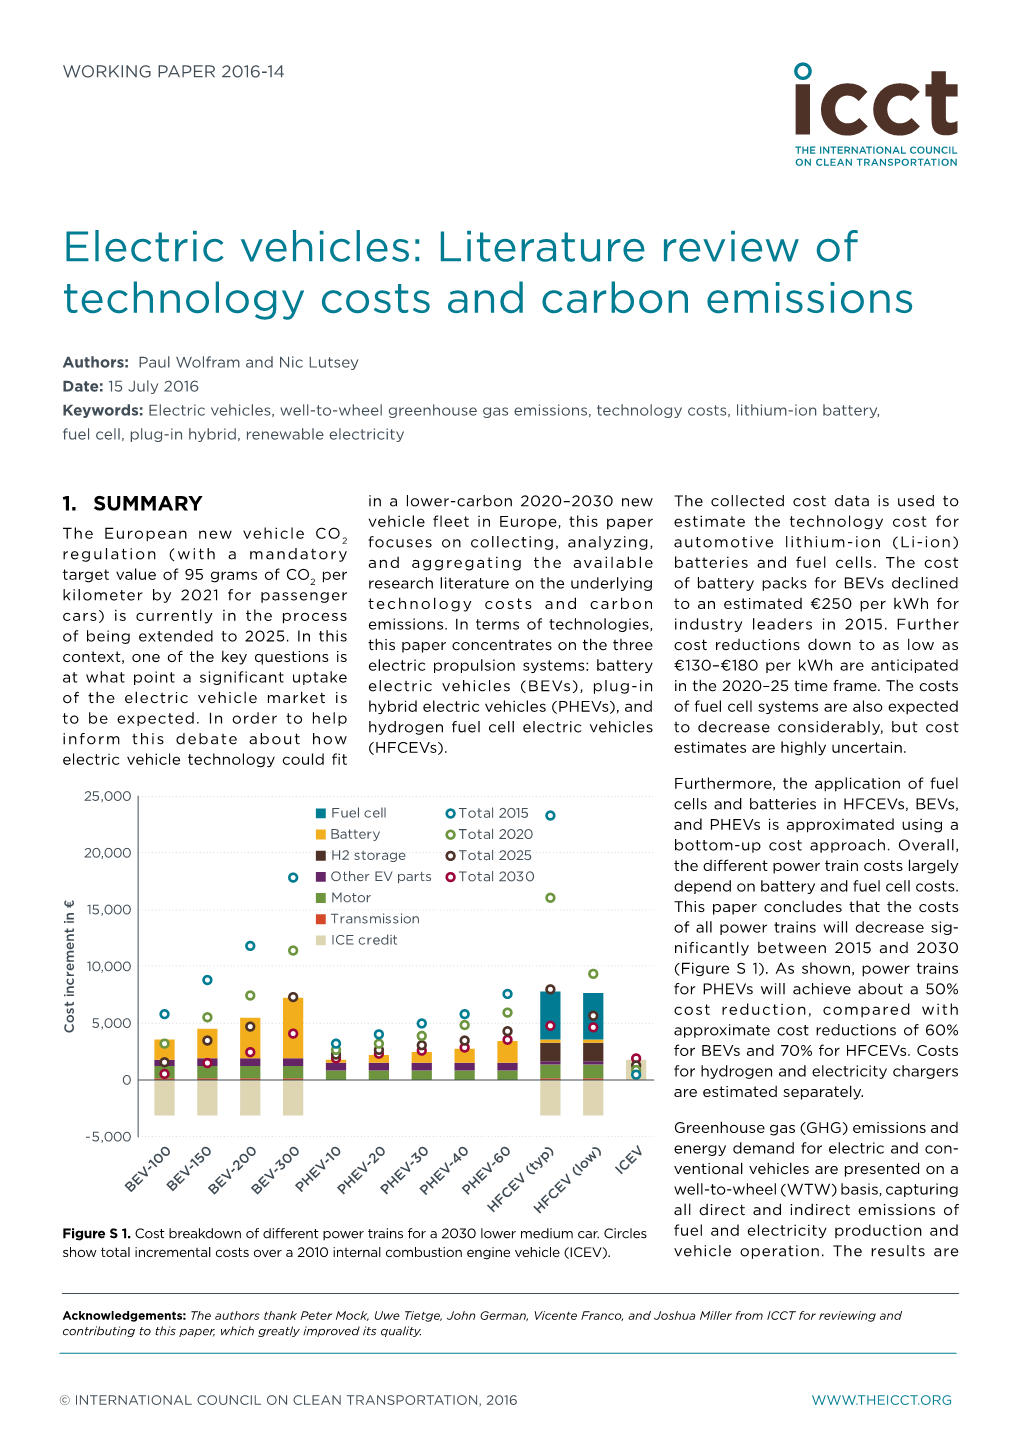 Electric Vehicles Literature Review of Technology Costs and Carbon